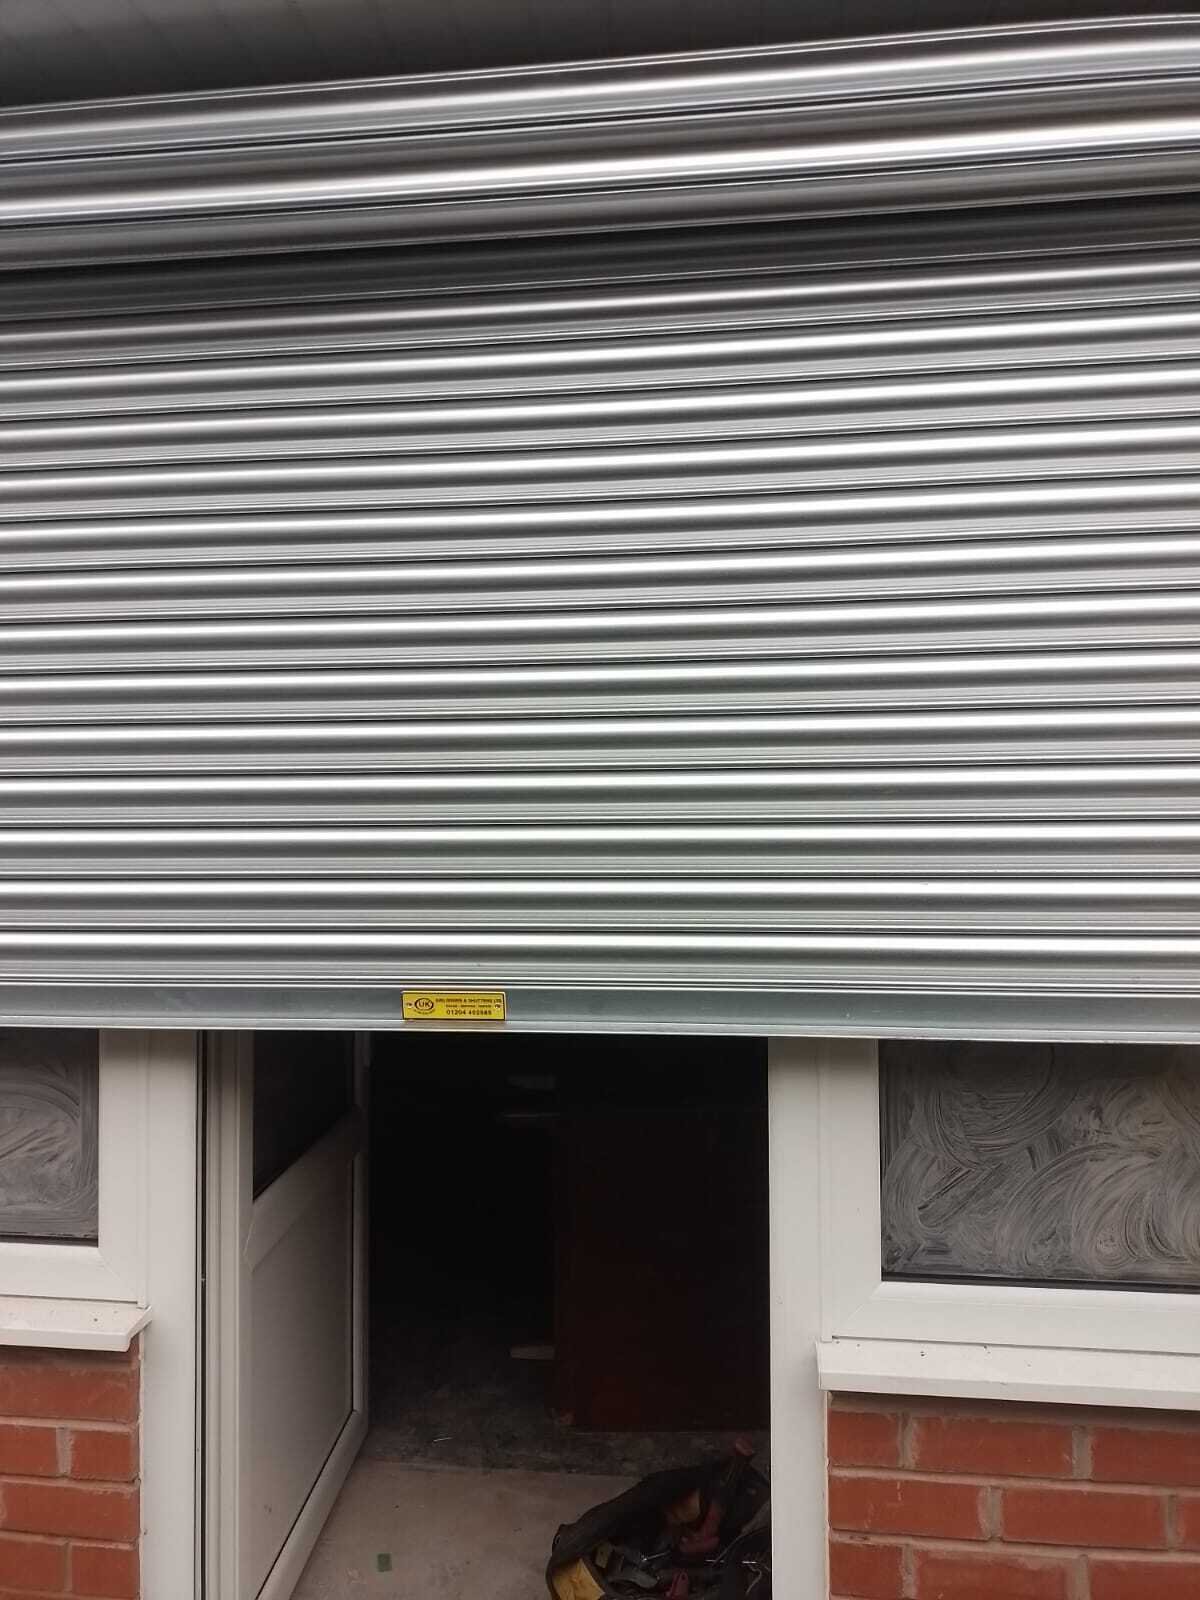 How Often Should Roller Shutters Be Serviced?